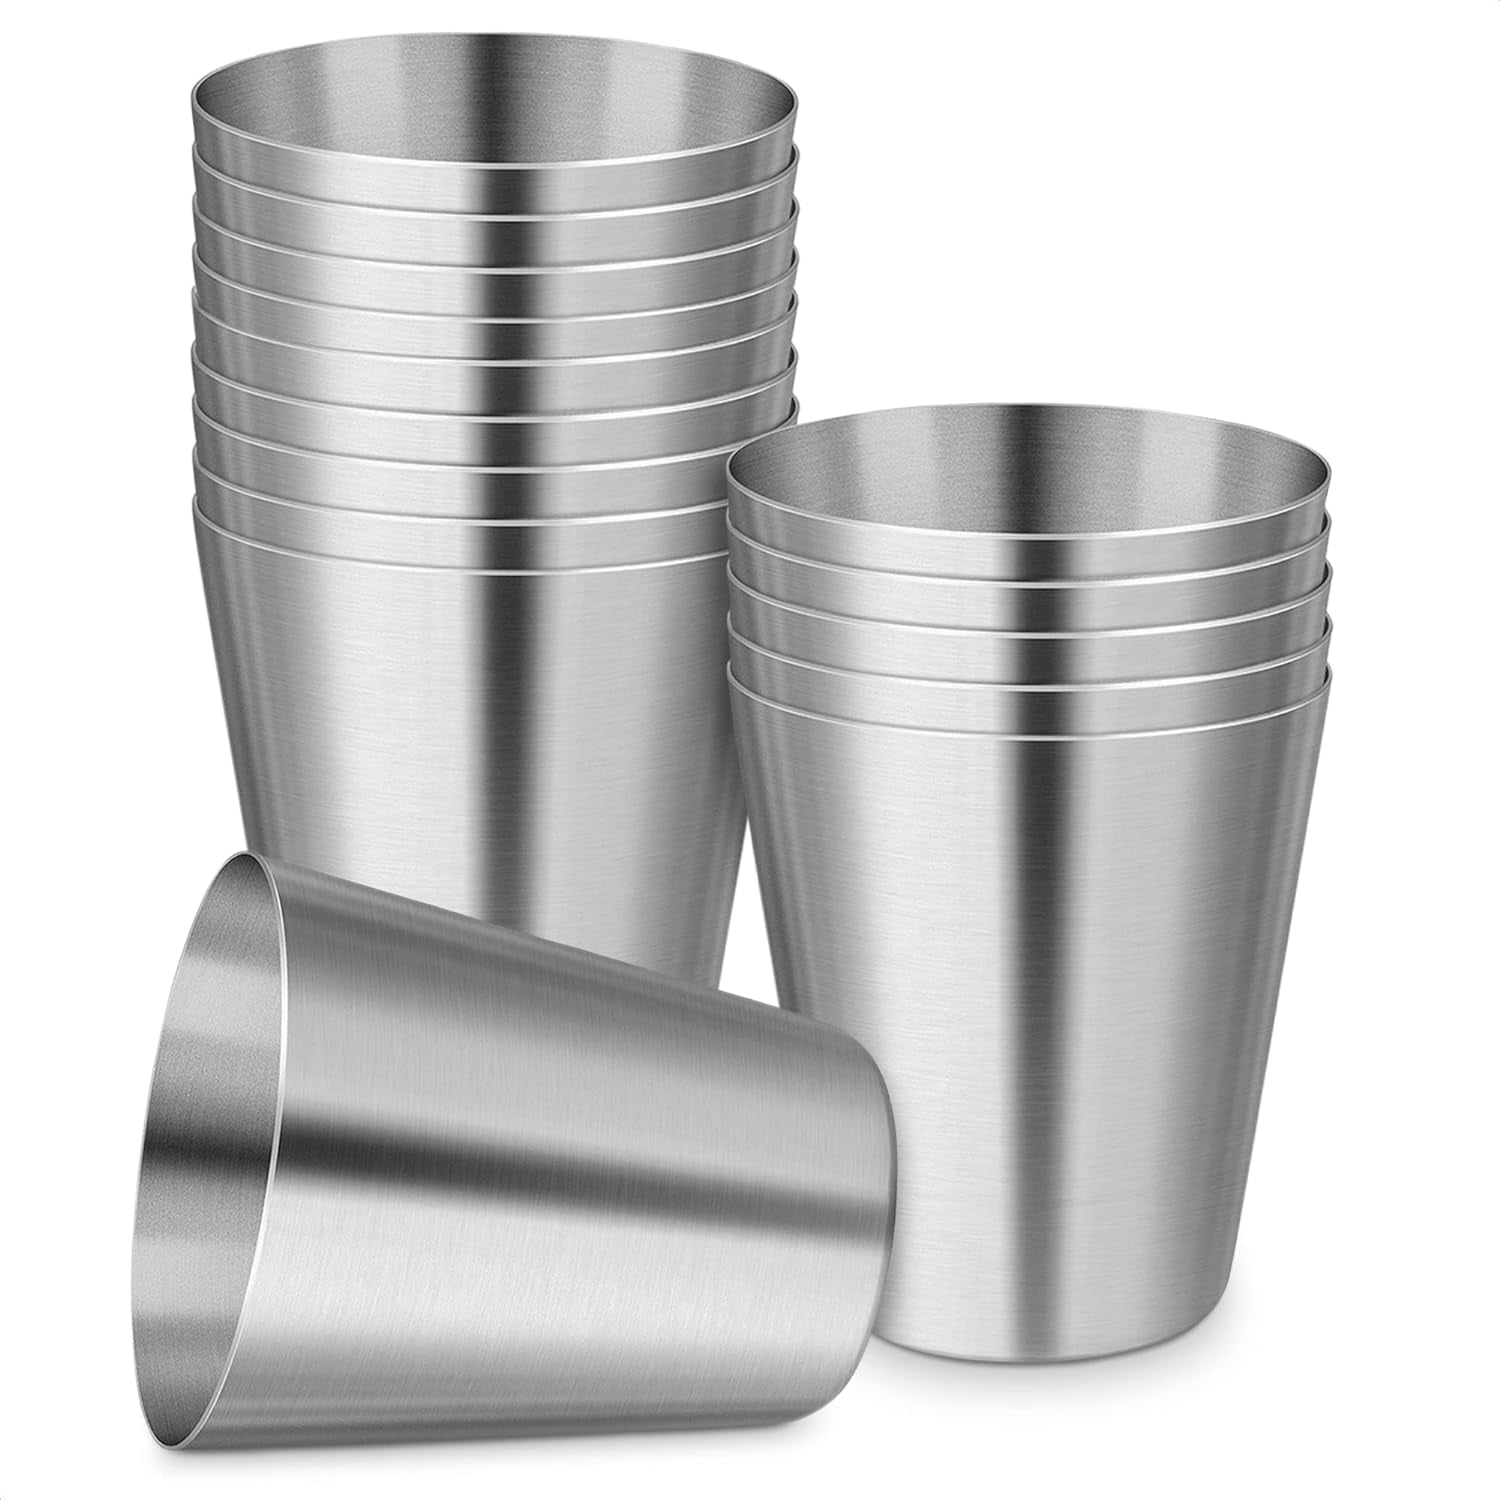 Promotional Stainless Steel Wine Drining Shot Glass - China Shot Glass and  Stainless Stee Shot Glass price